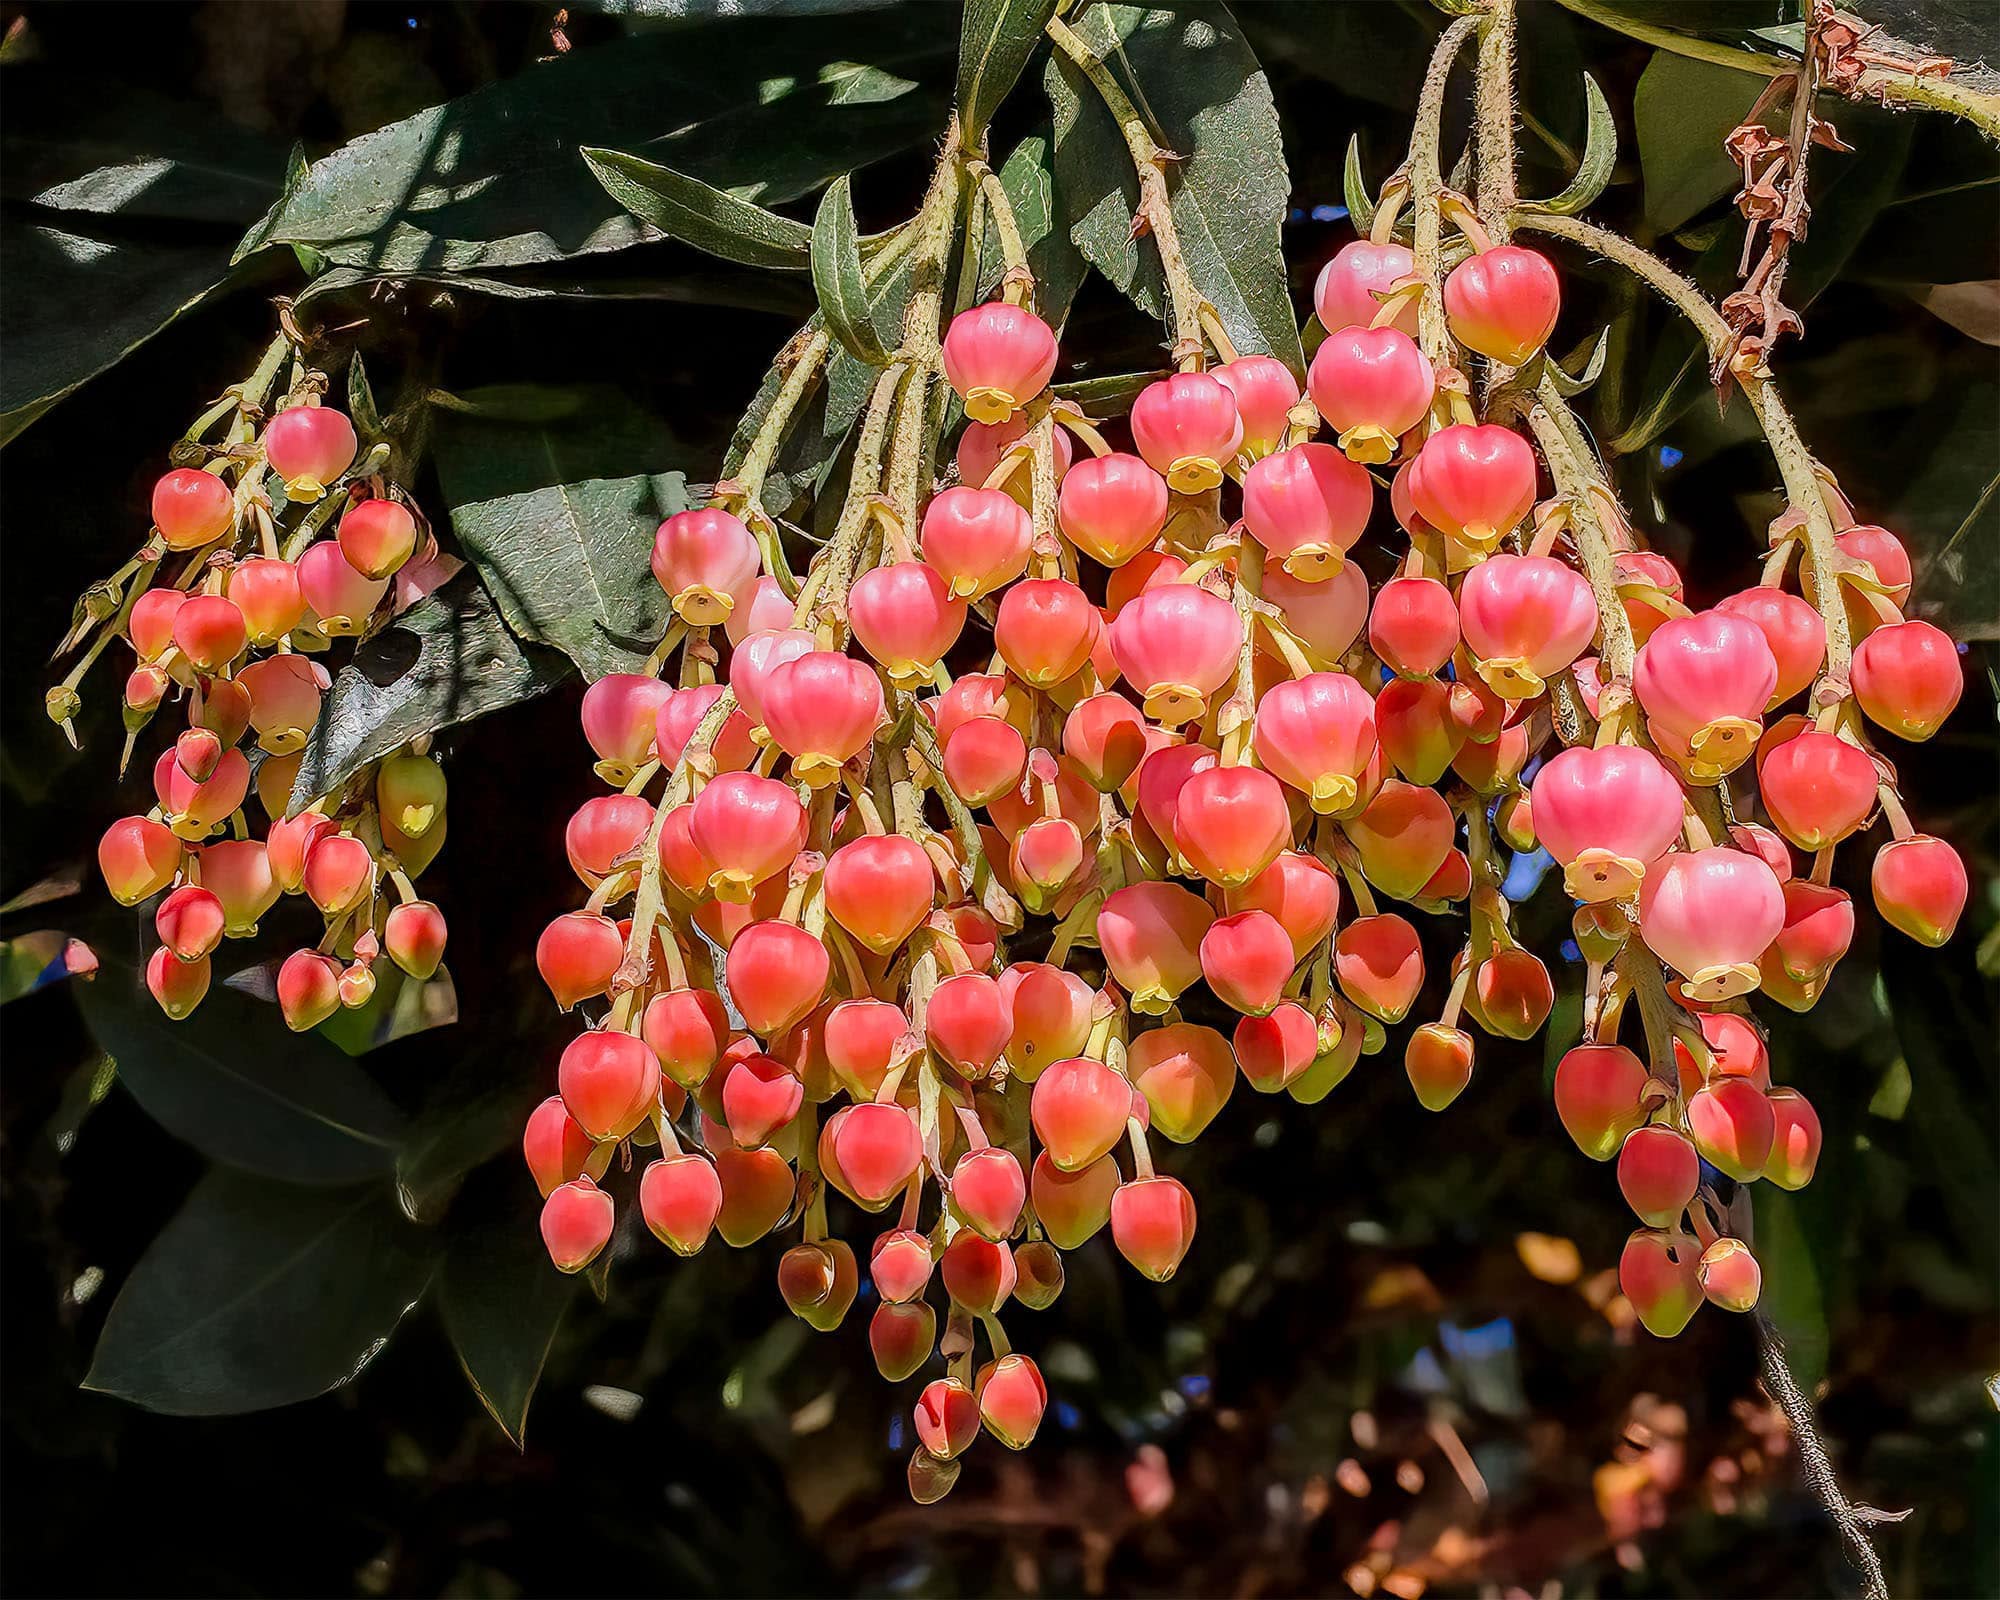 photo: flowers like sweet berries hanging in a cluster from this tree